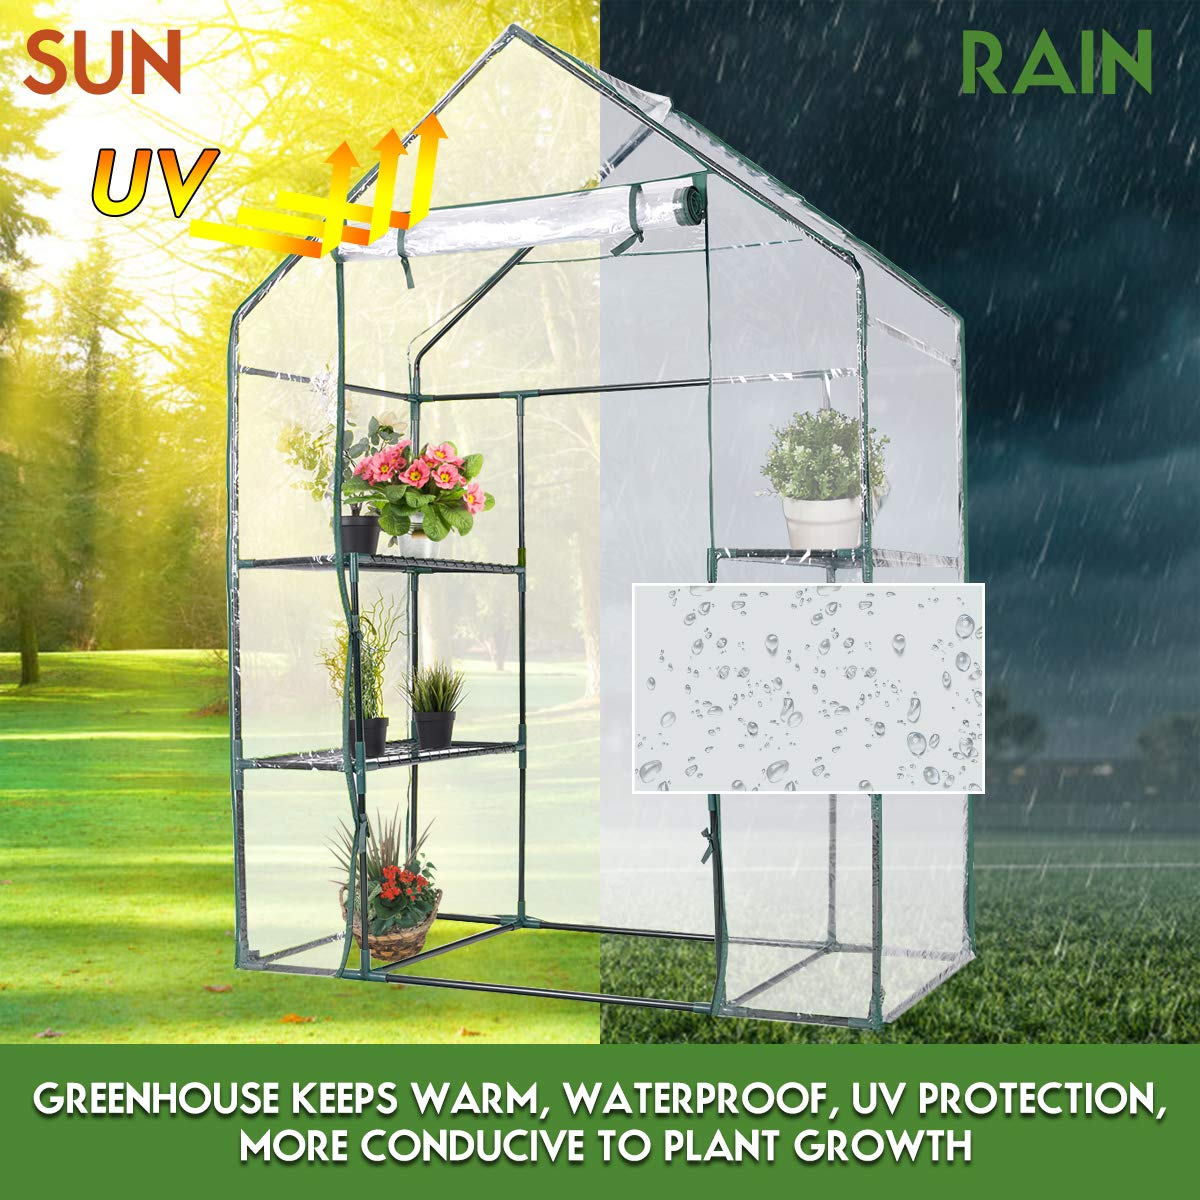 Giantex Greenhouse Outdoor Large Walk-in Plant Green House with 3 Tier Shelves for Plants